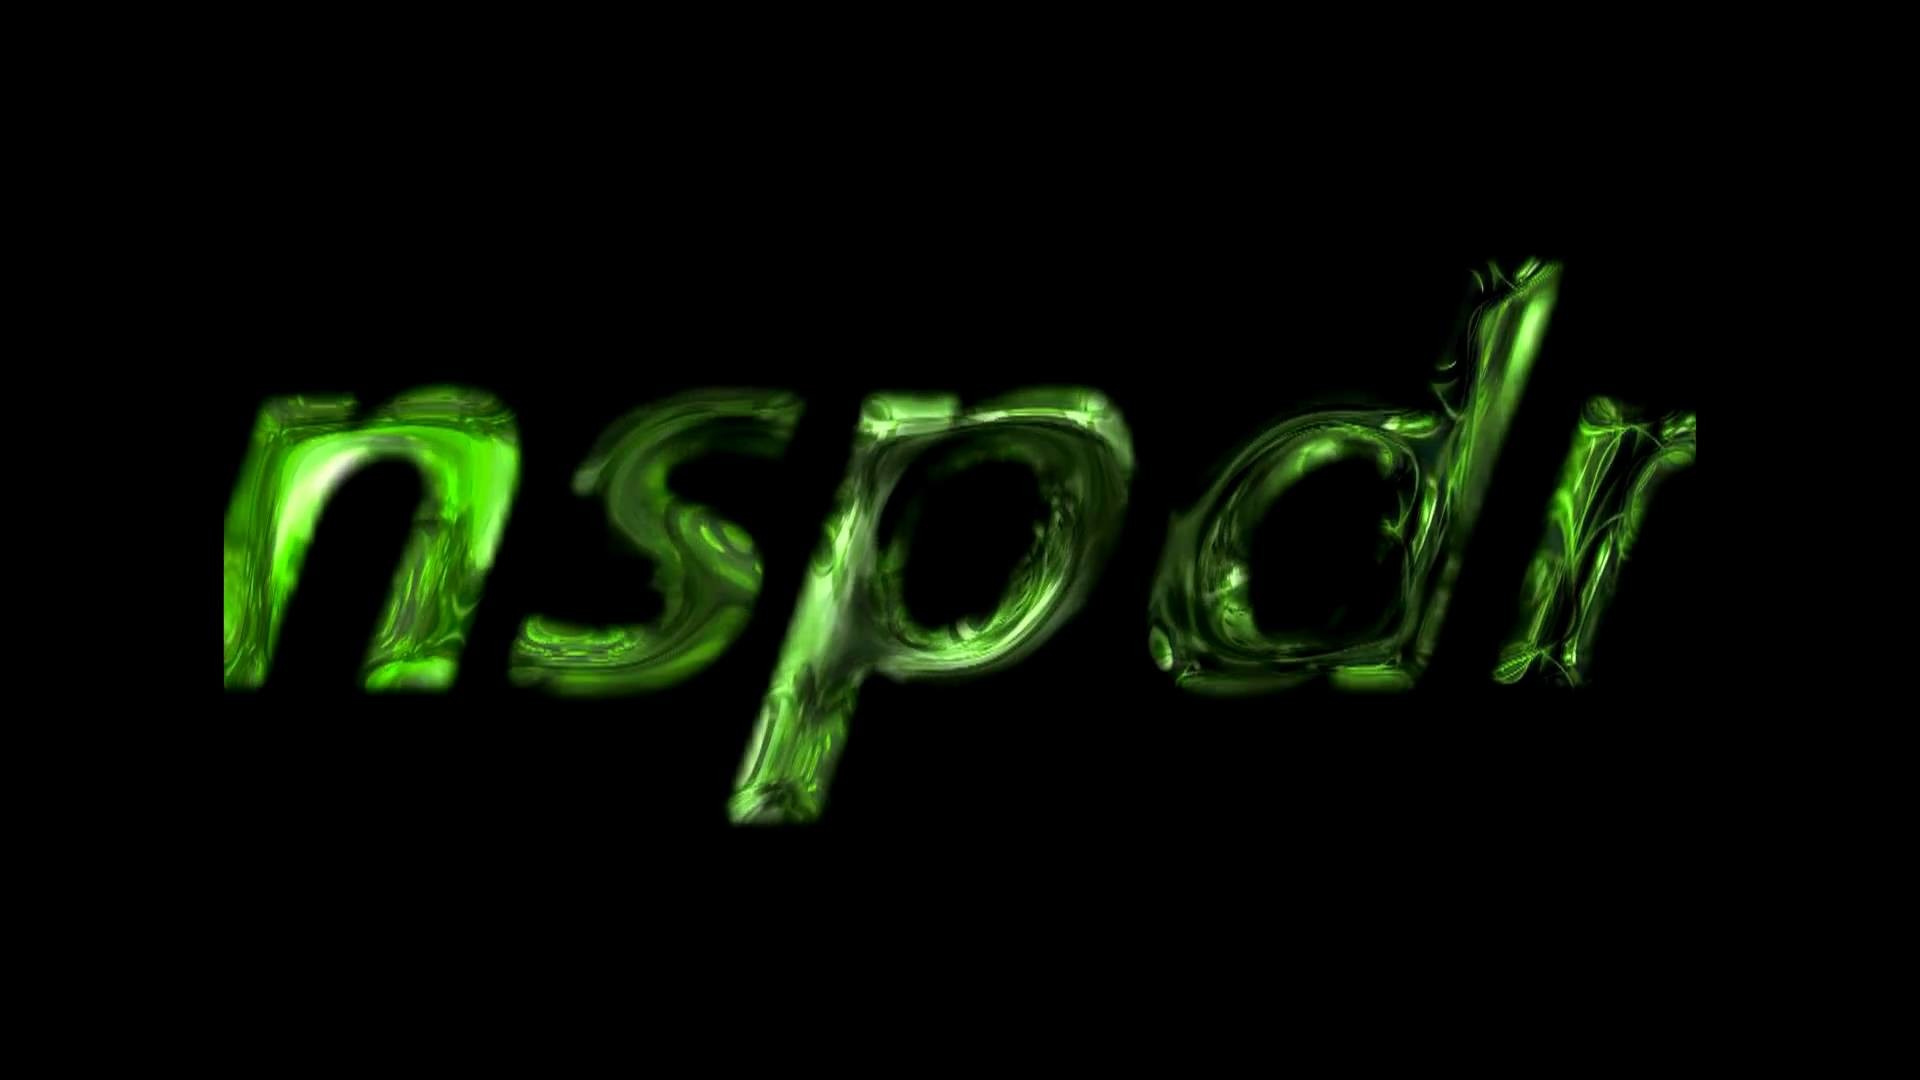 1920x1080 Sony vegas: CRYSTAL TEXT using modern warfare 2 background picture